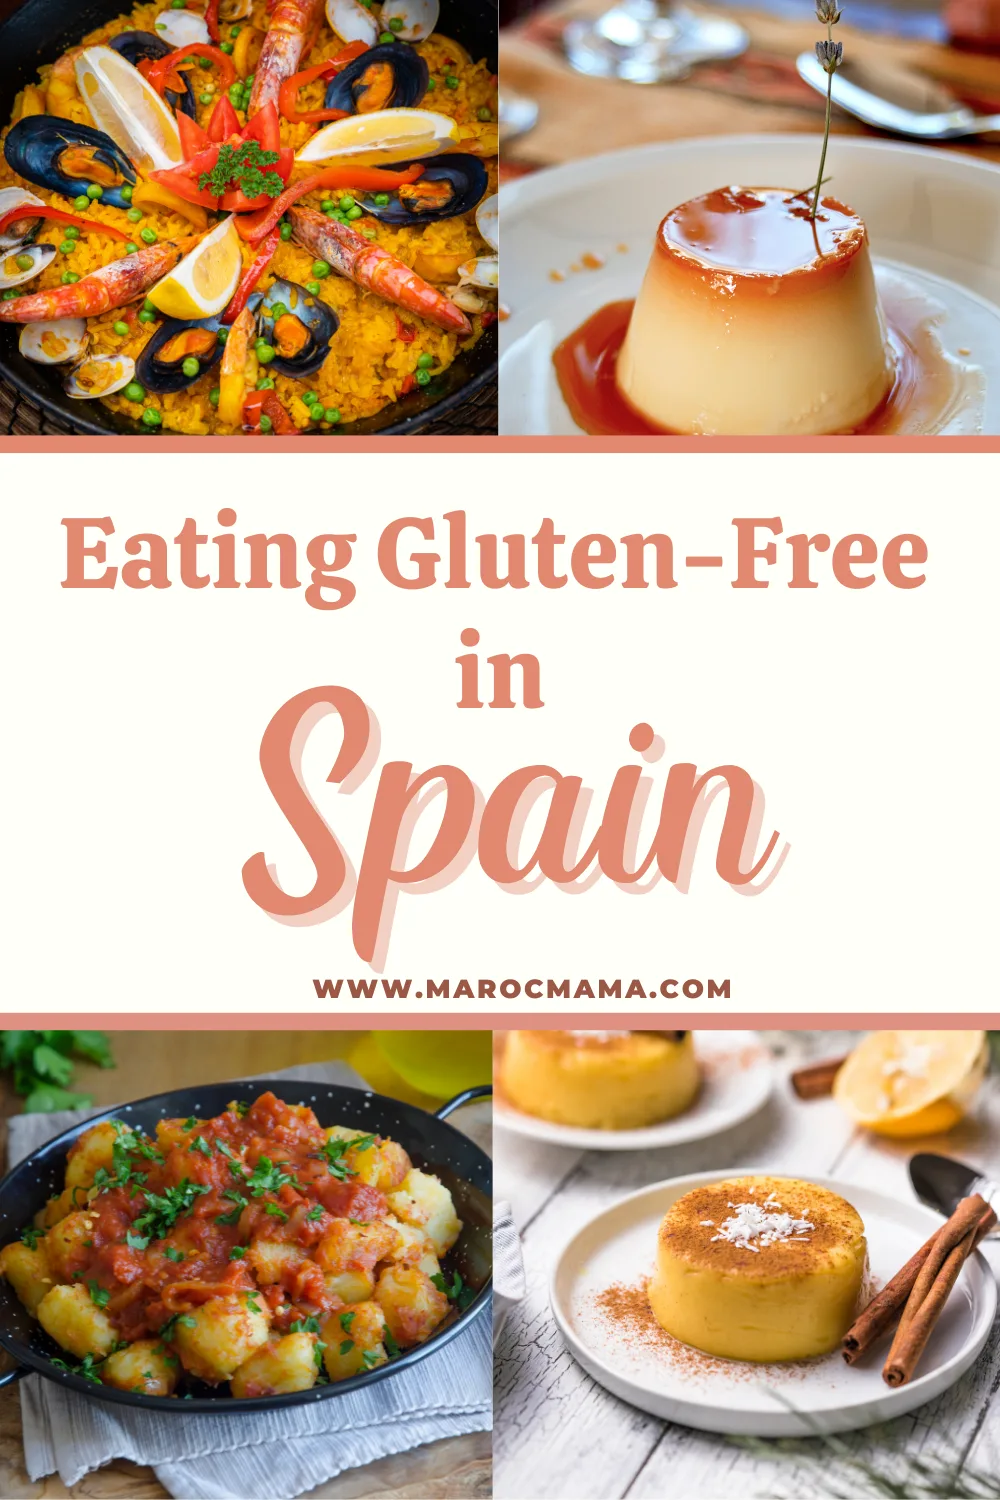 different foods that is gluten-free in Spain